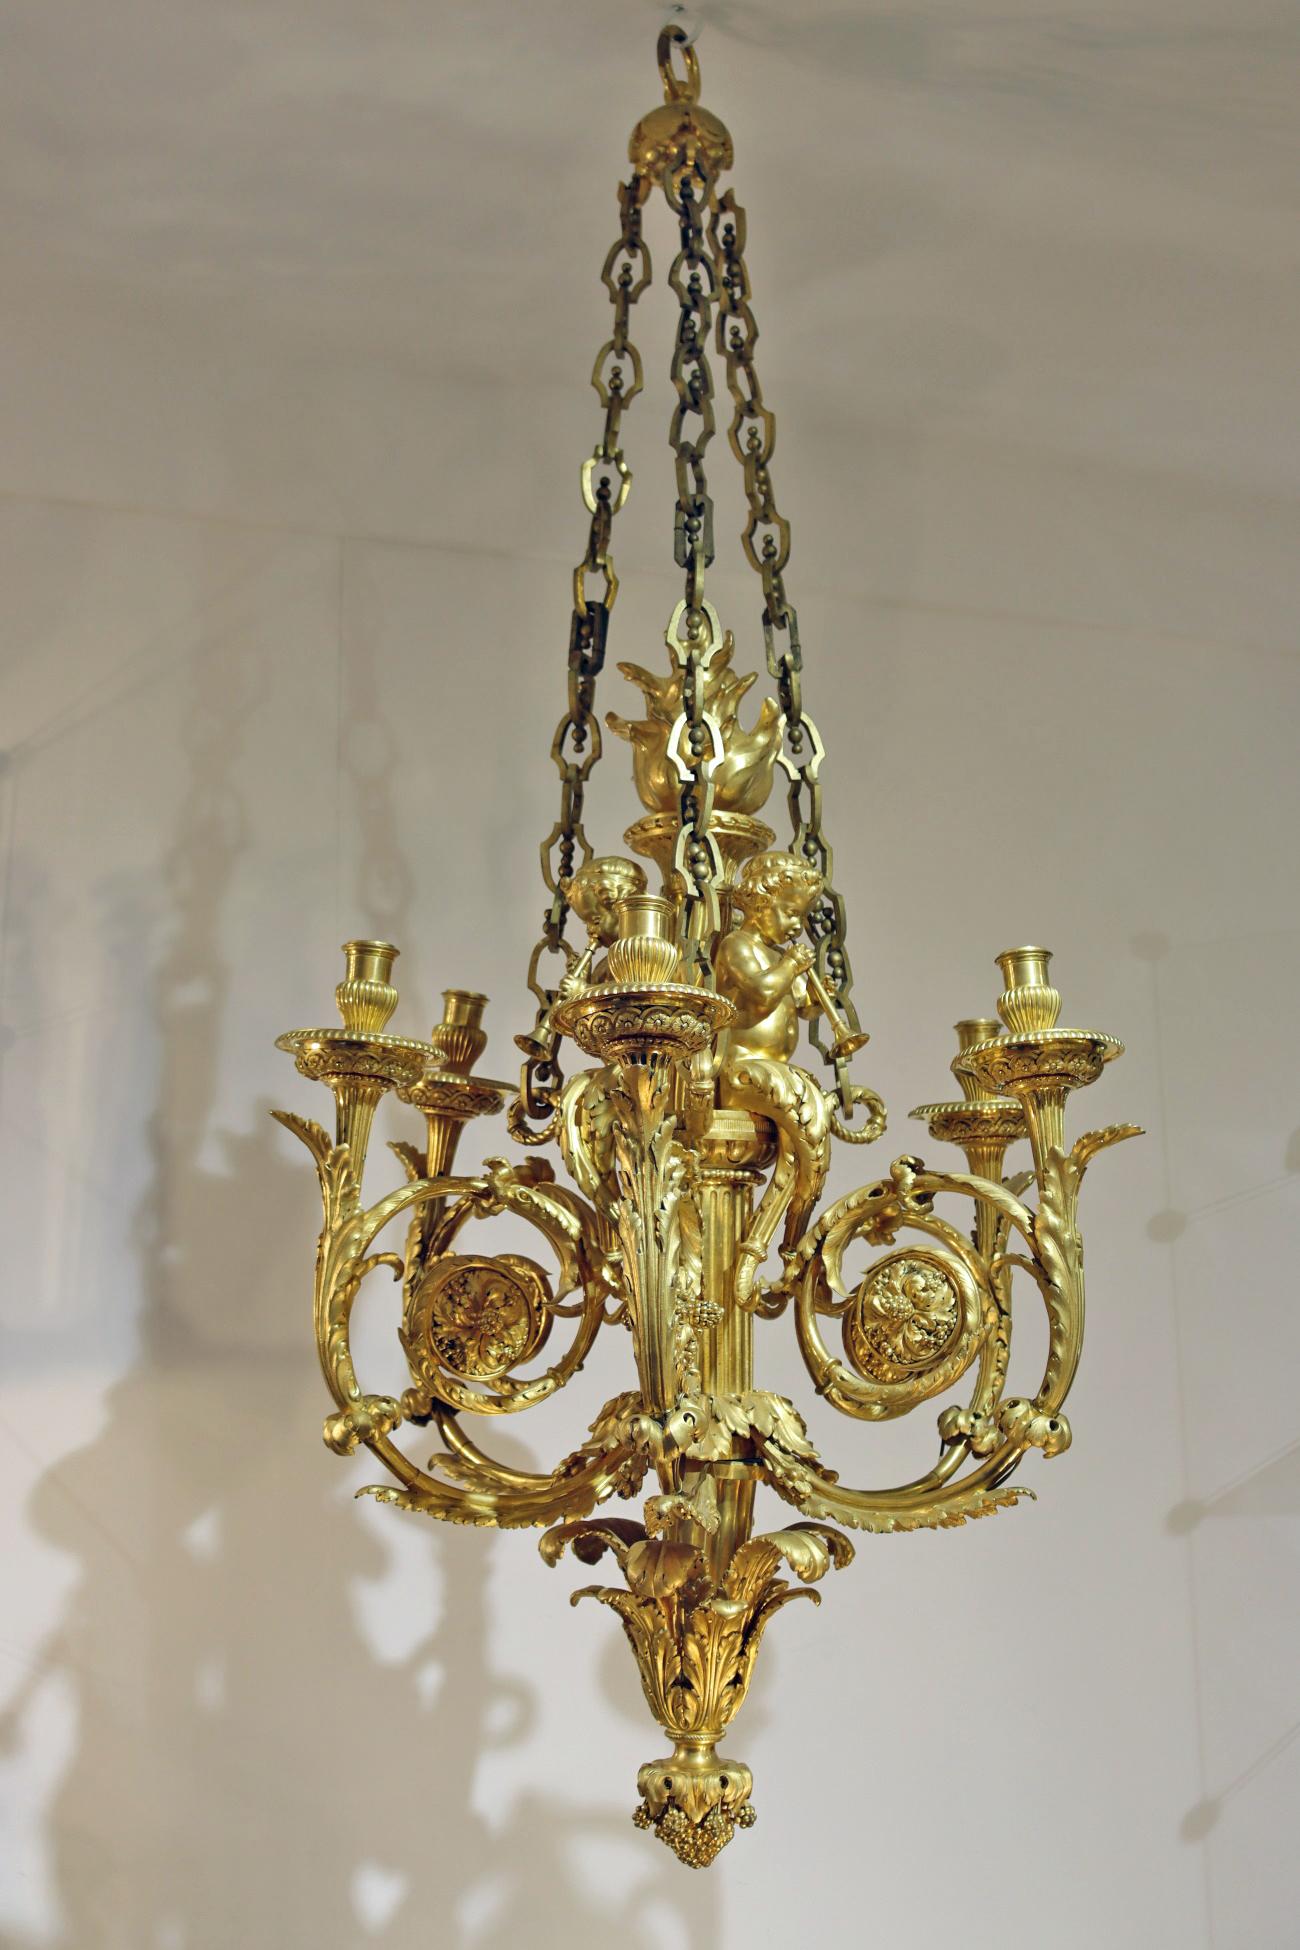 A gilt bronze chandelier with six winding lights surmounted by child blowers seated on a cylindrical fluted shaft finished with a base decorated with foliage and bunches of grapes; (small missing chains; pierced for the electricity).

Louis XV